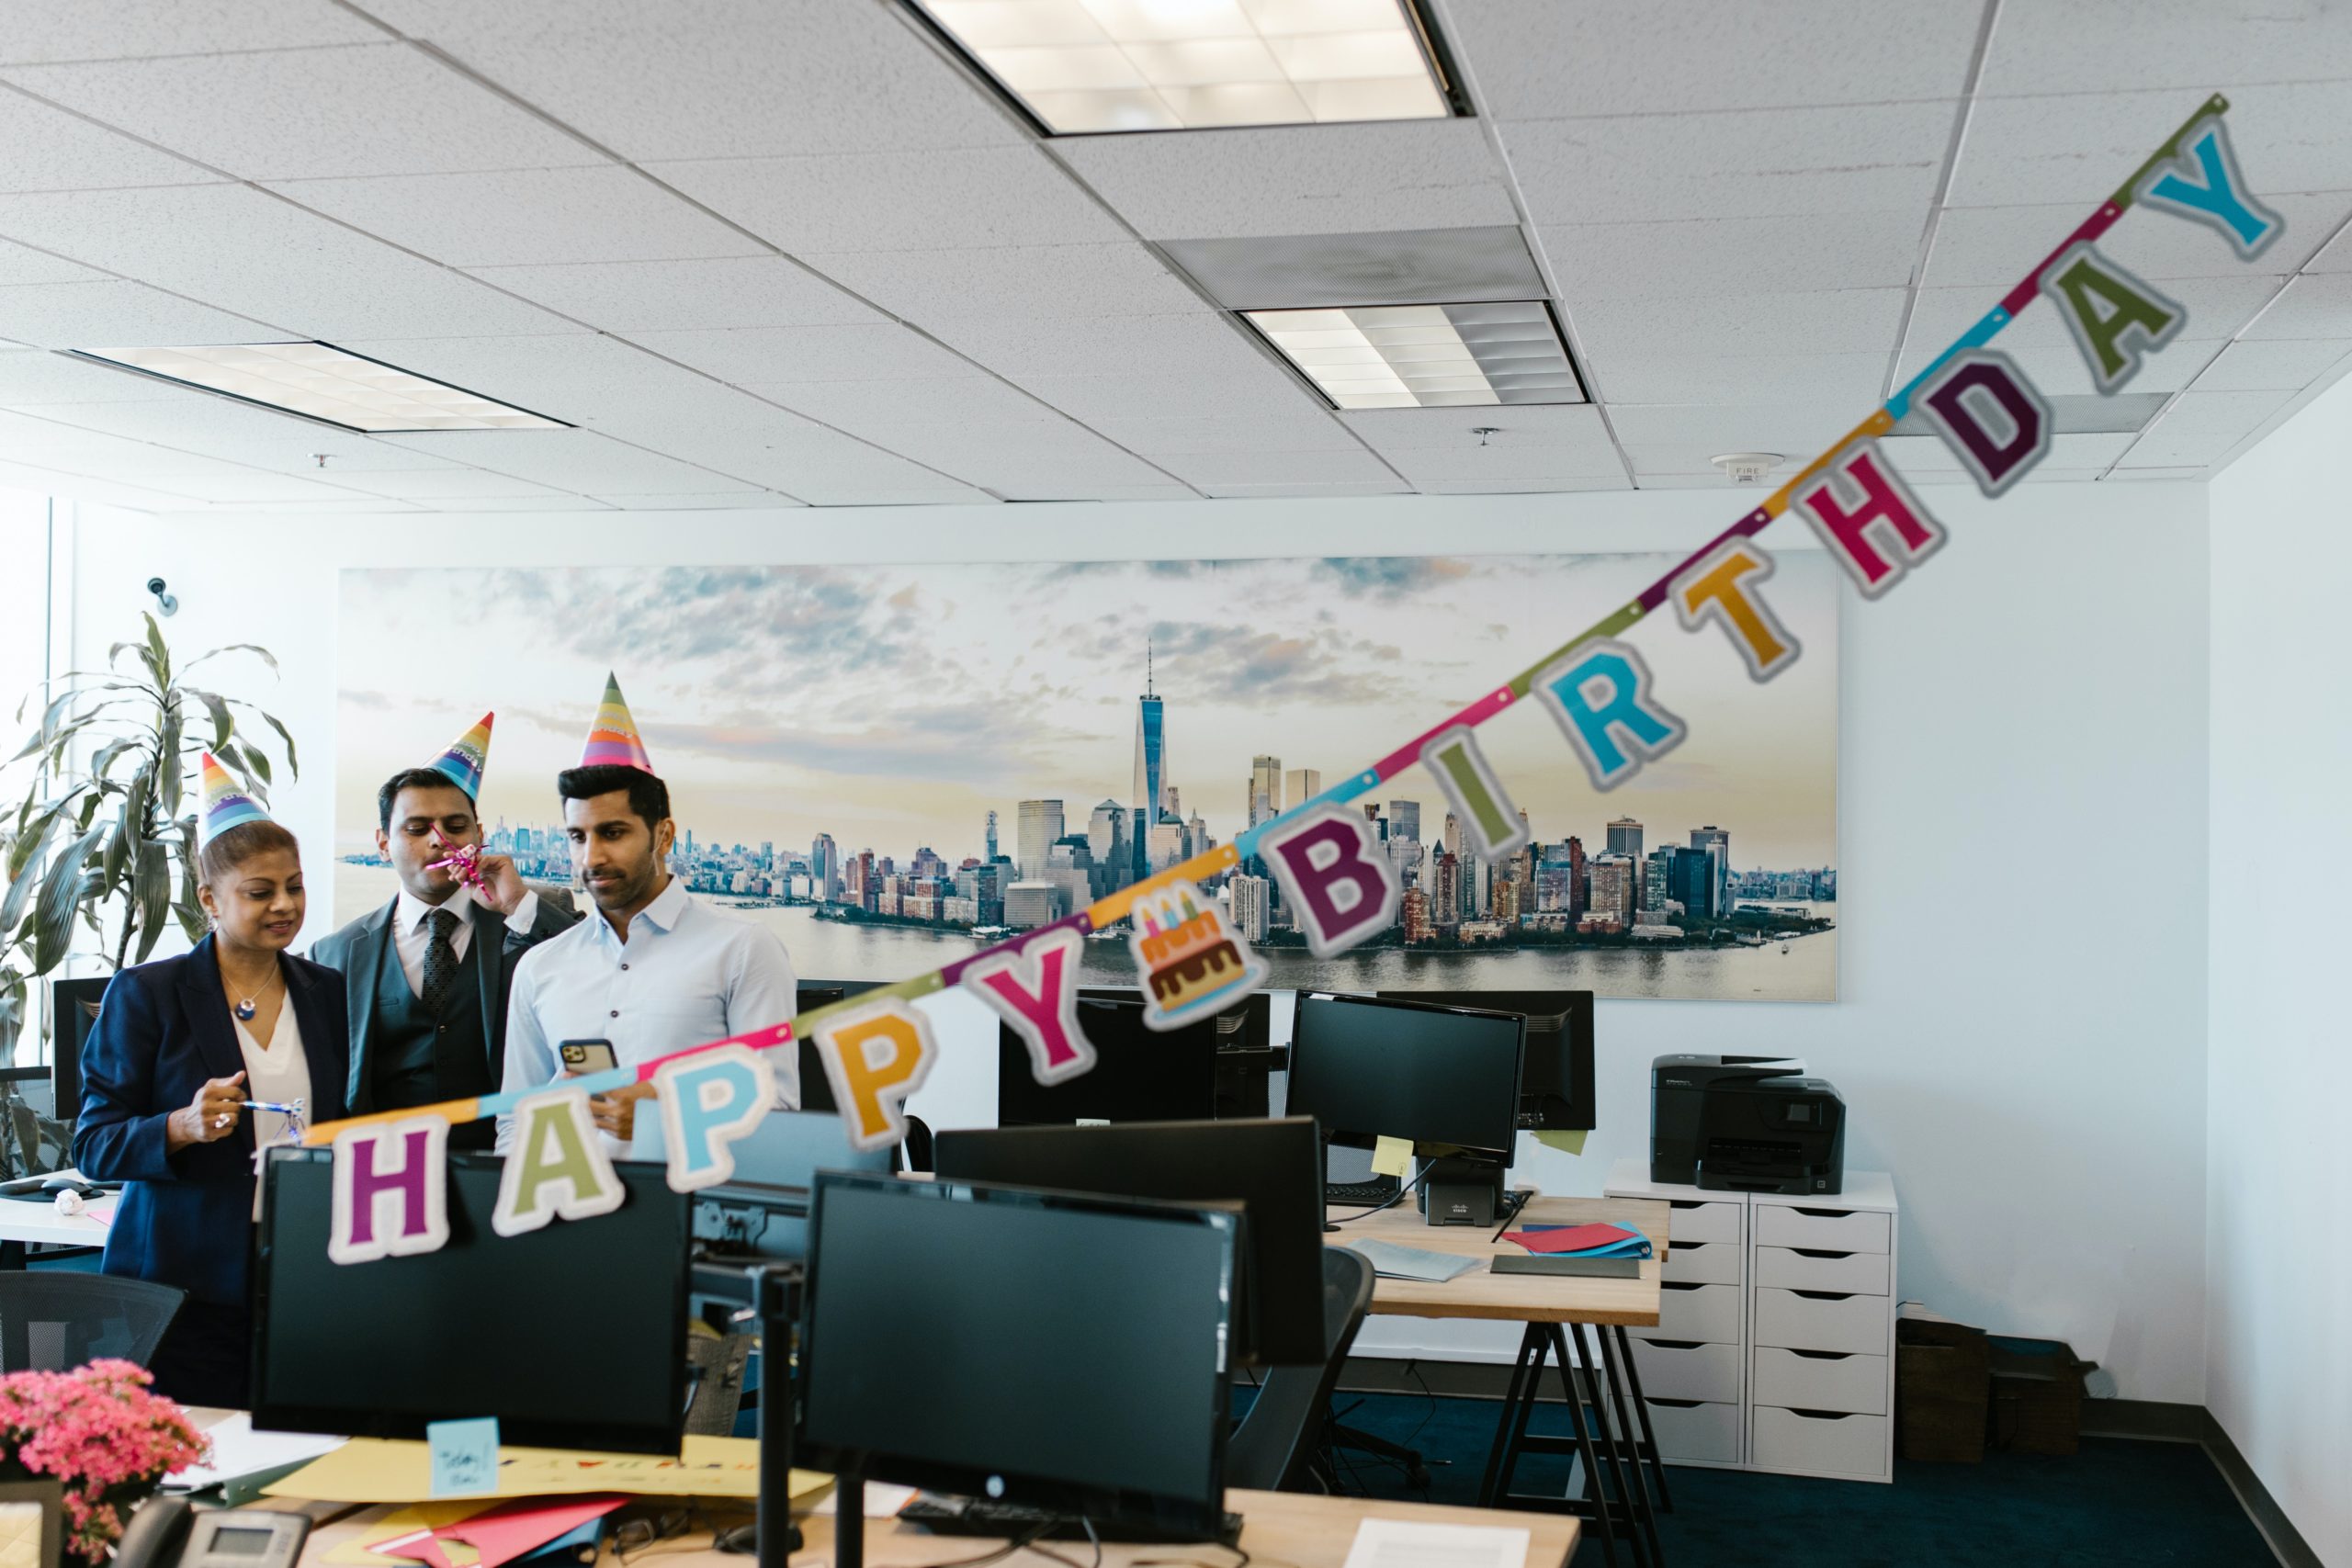  a happy birthday banner hanging inside the office with people wearing party hats